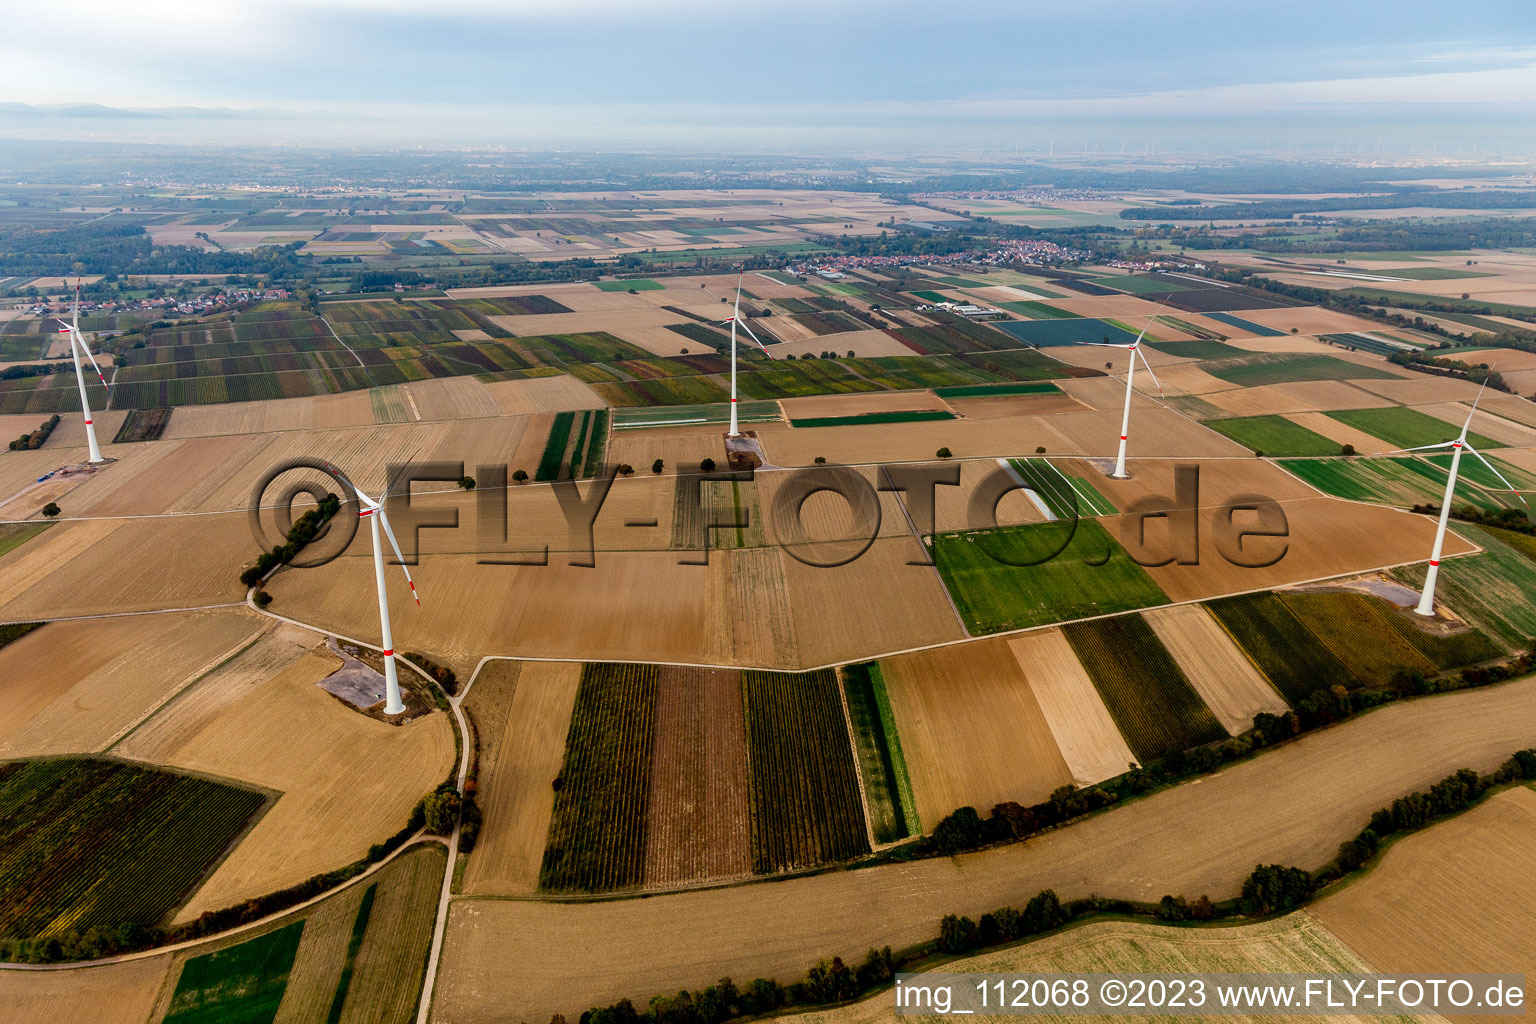 EnBW wind farm - wind turbine with 6 wind turbines in Freckenfeld in the state Rhineland-Palatinate, Germany seen from above